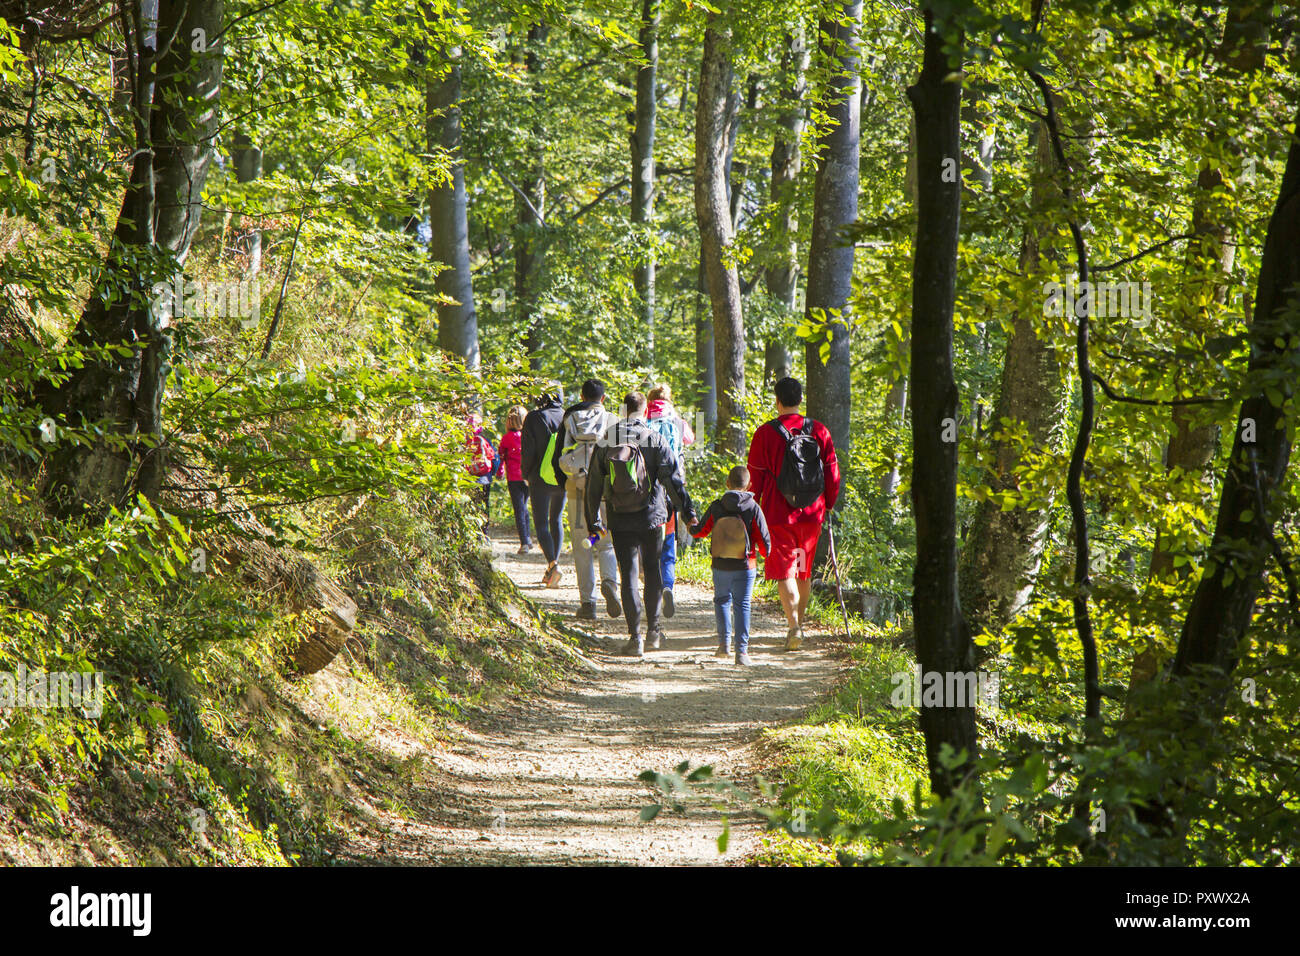 Group of people walking by hiking trail in forest Stock Photo